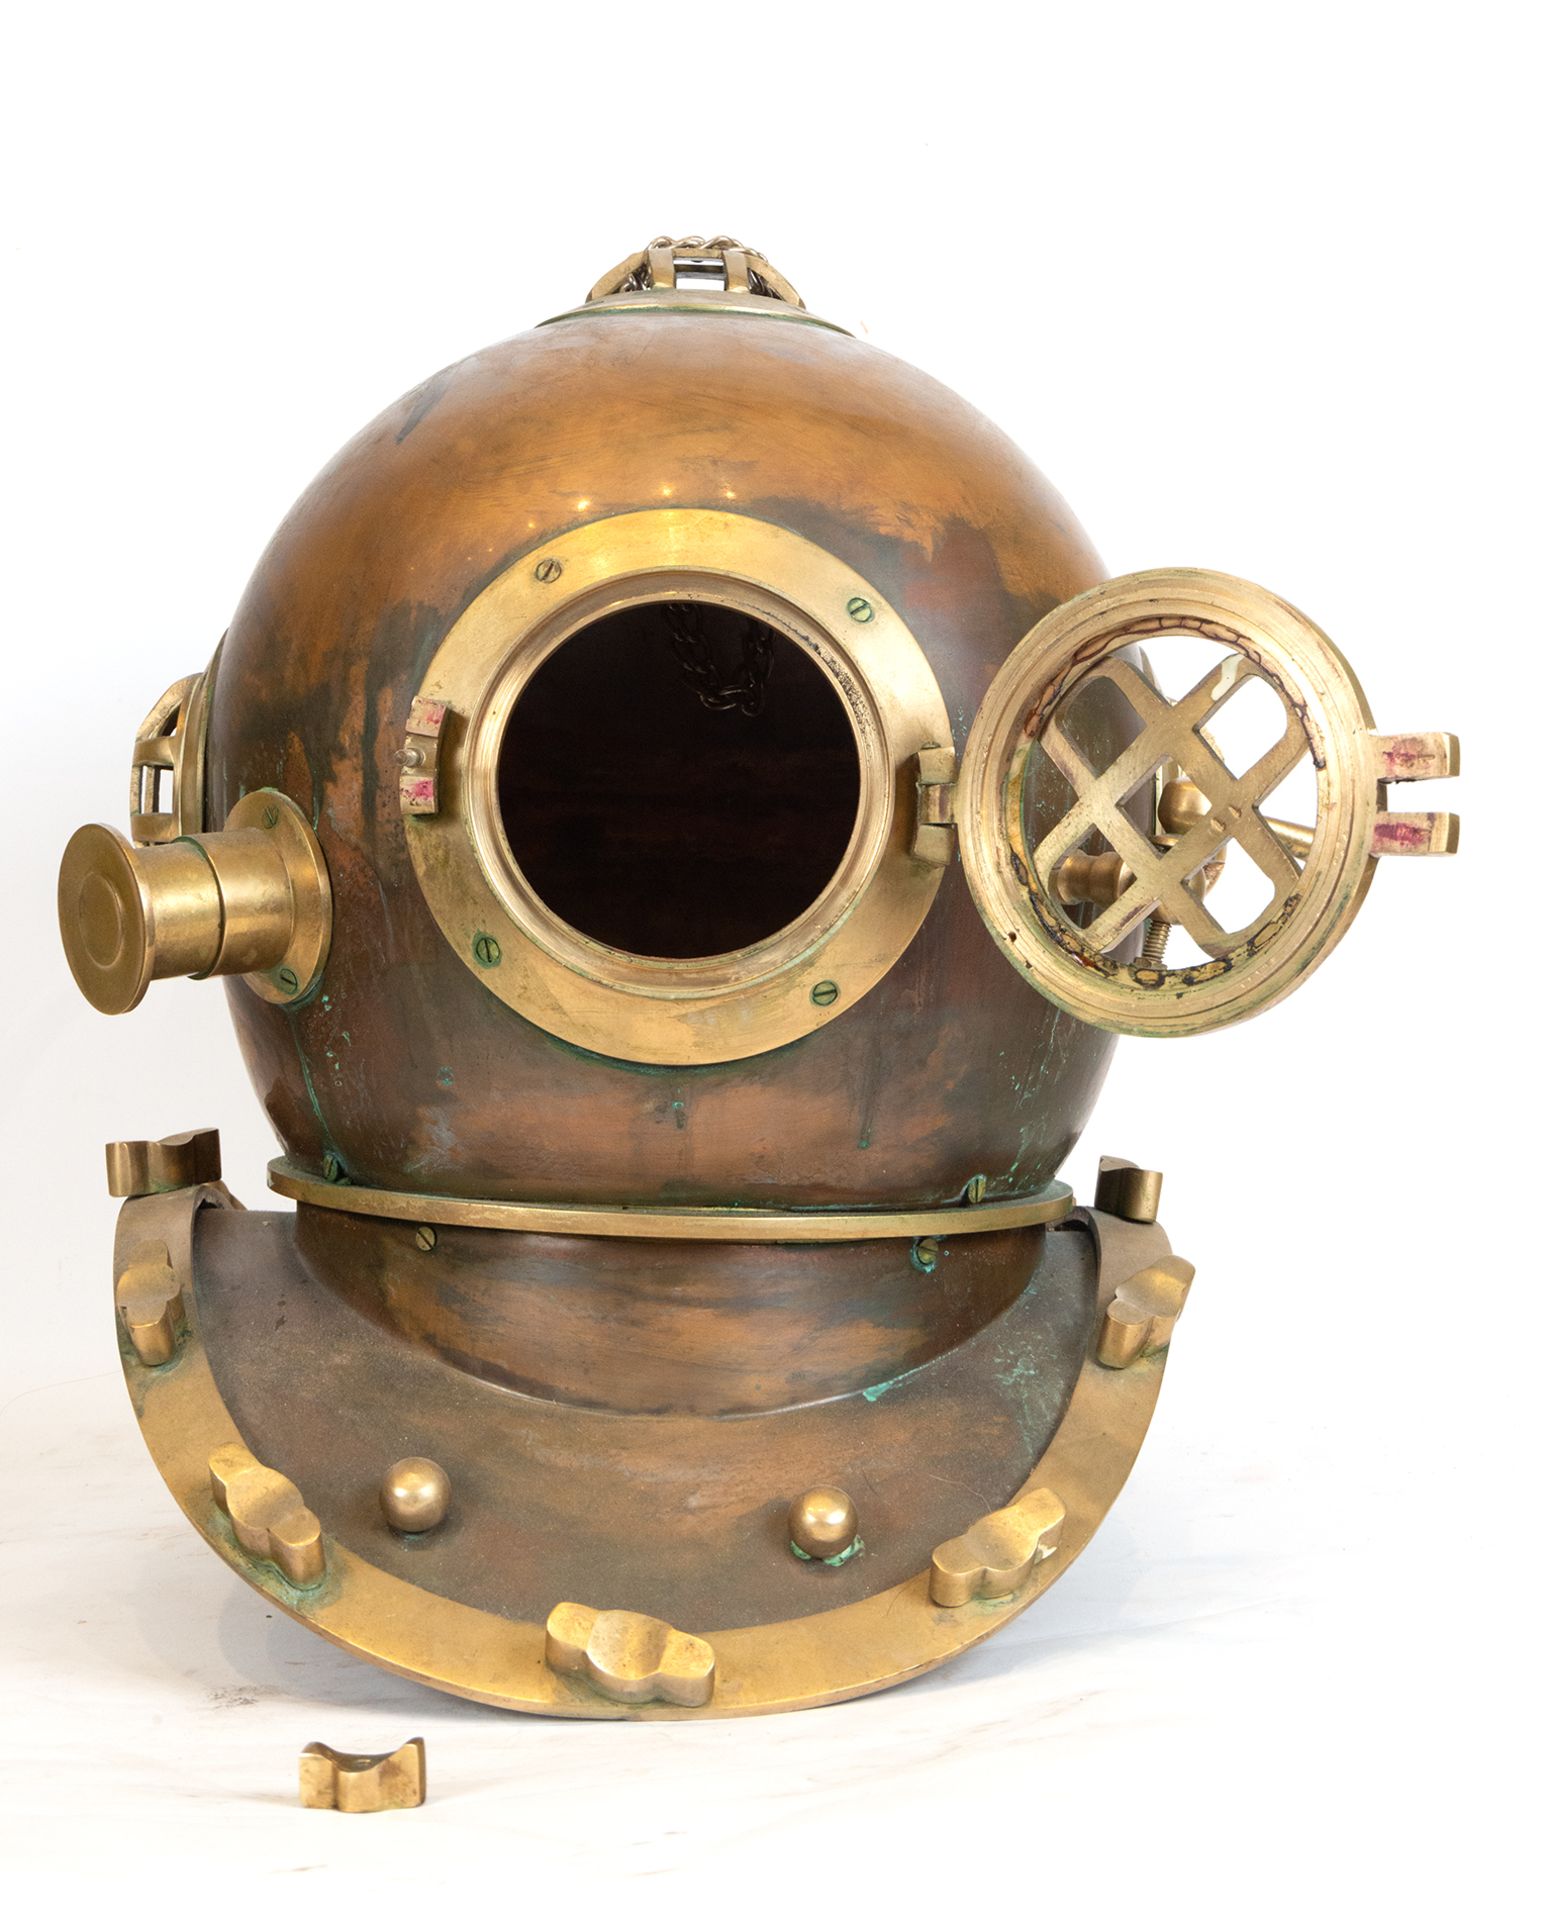 Rare Solid Bronze Diver's Helmet, Italy or England, late 19th century - early 20th century - Image 2 of 5